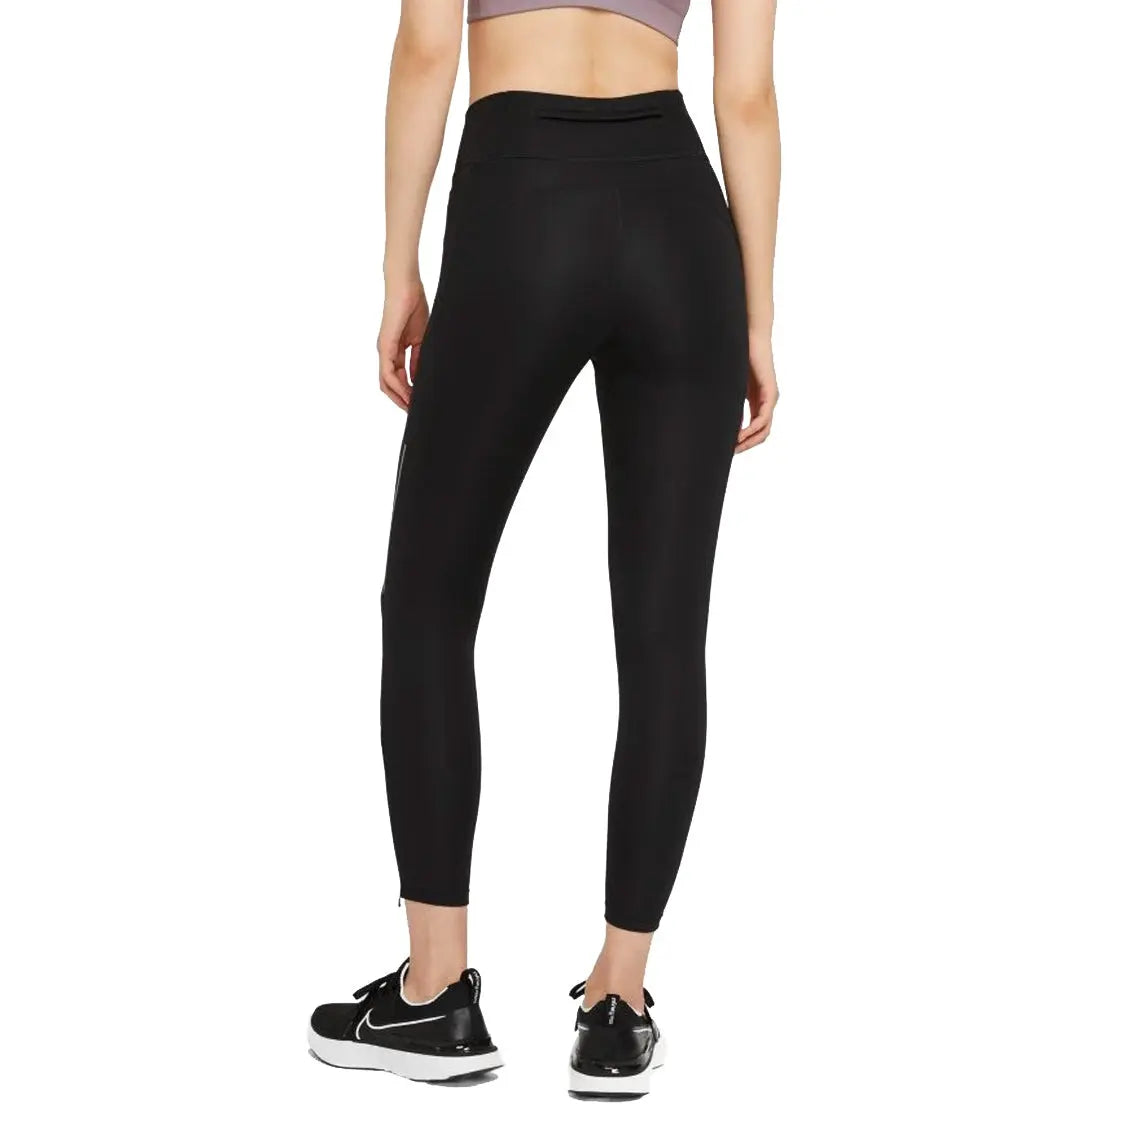 Womens Nike Epic Faster Tights